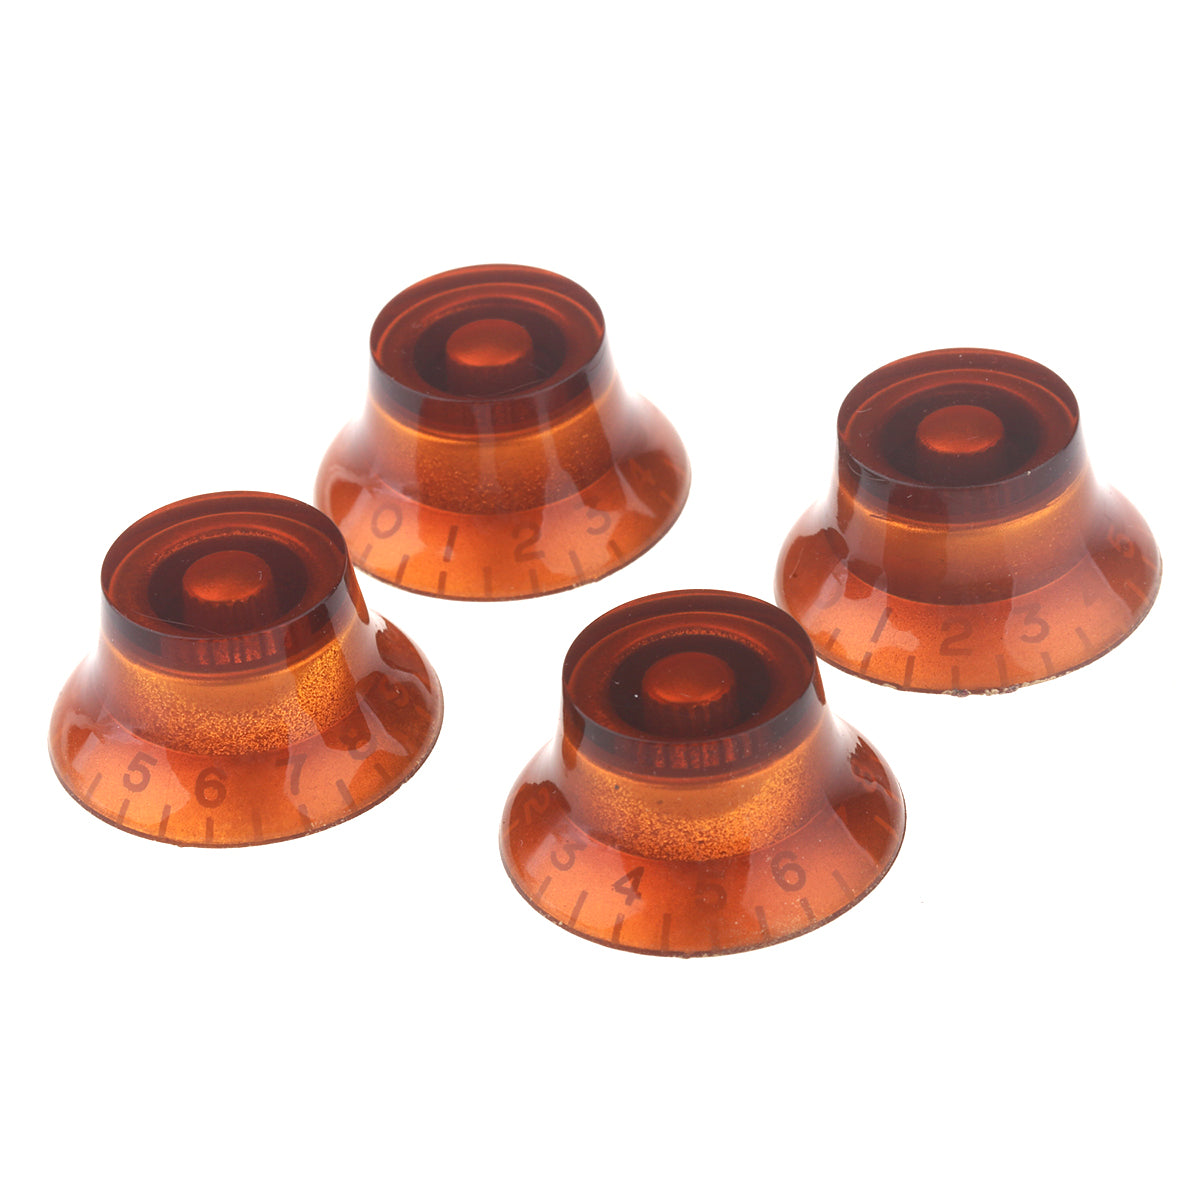 Musiclily Metric 6mm Top Hat LP Style Guitar Speed Control Knobs,Amber with White Number(4 Pieces)